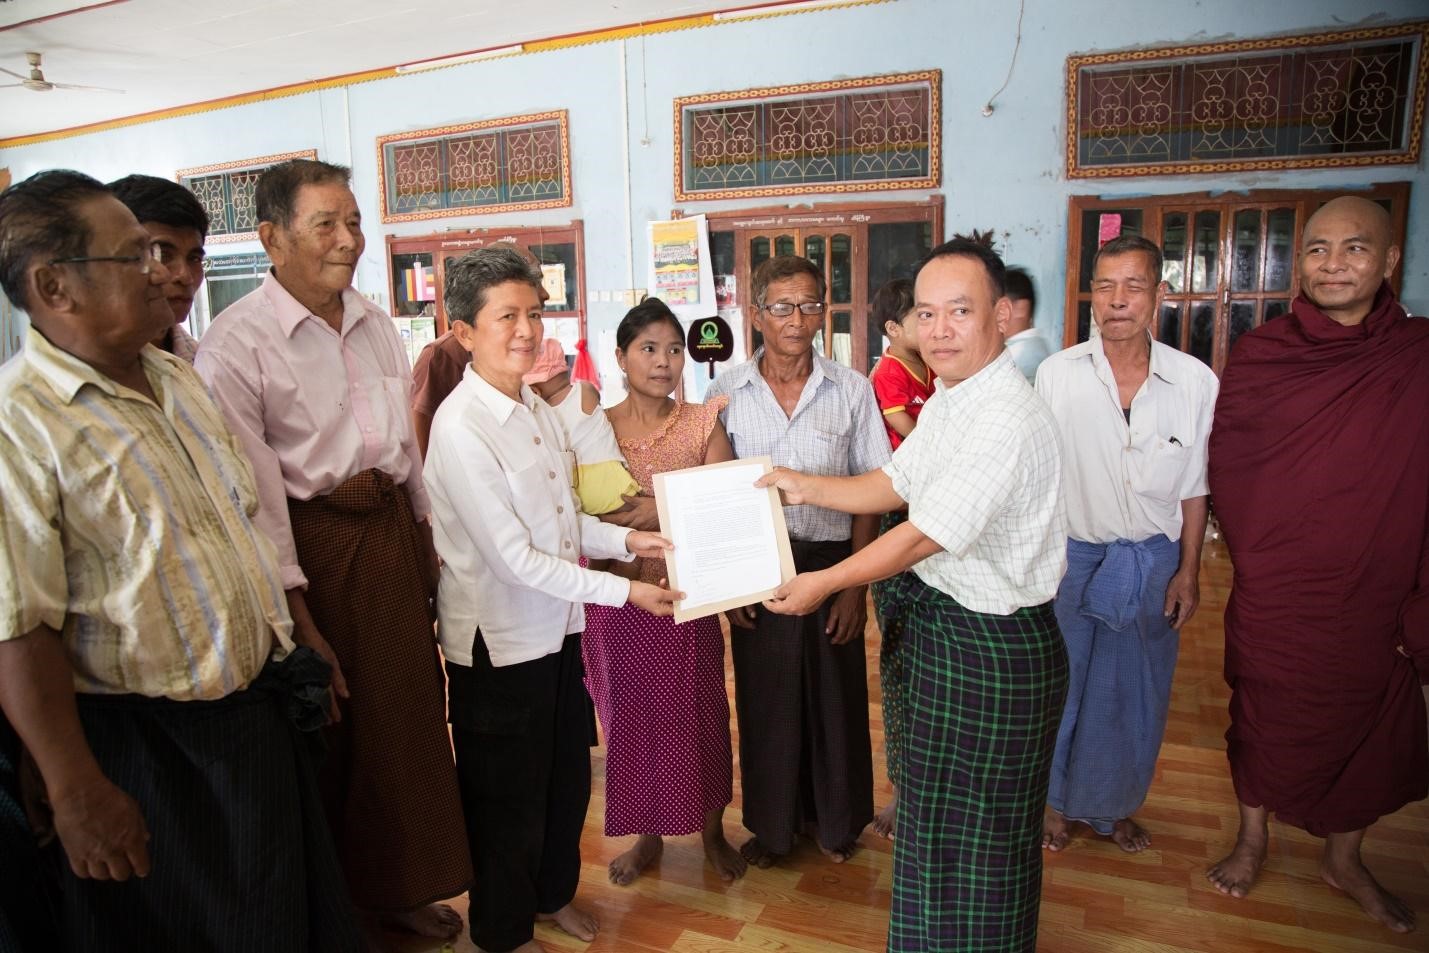 A representative of CSO groups and villagers submitted a petition to Ms. Tuenjai Deetes (middle), Commissioner of the National Human Rights Commission of Thailand on 25 February 2017 at Maying Gyi village